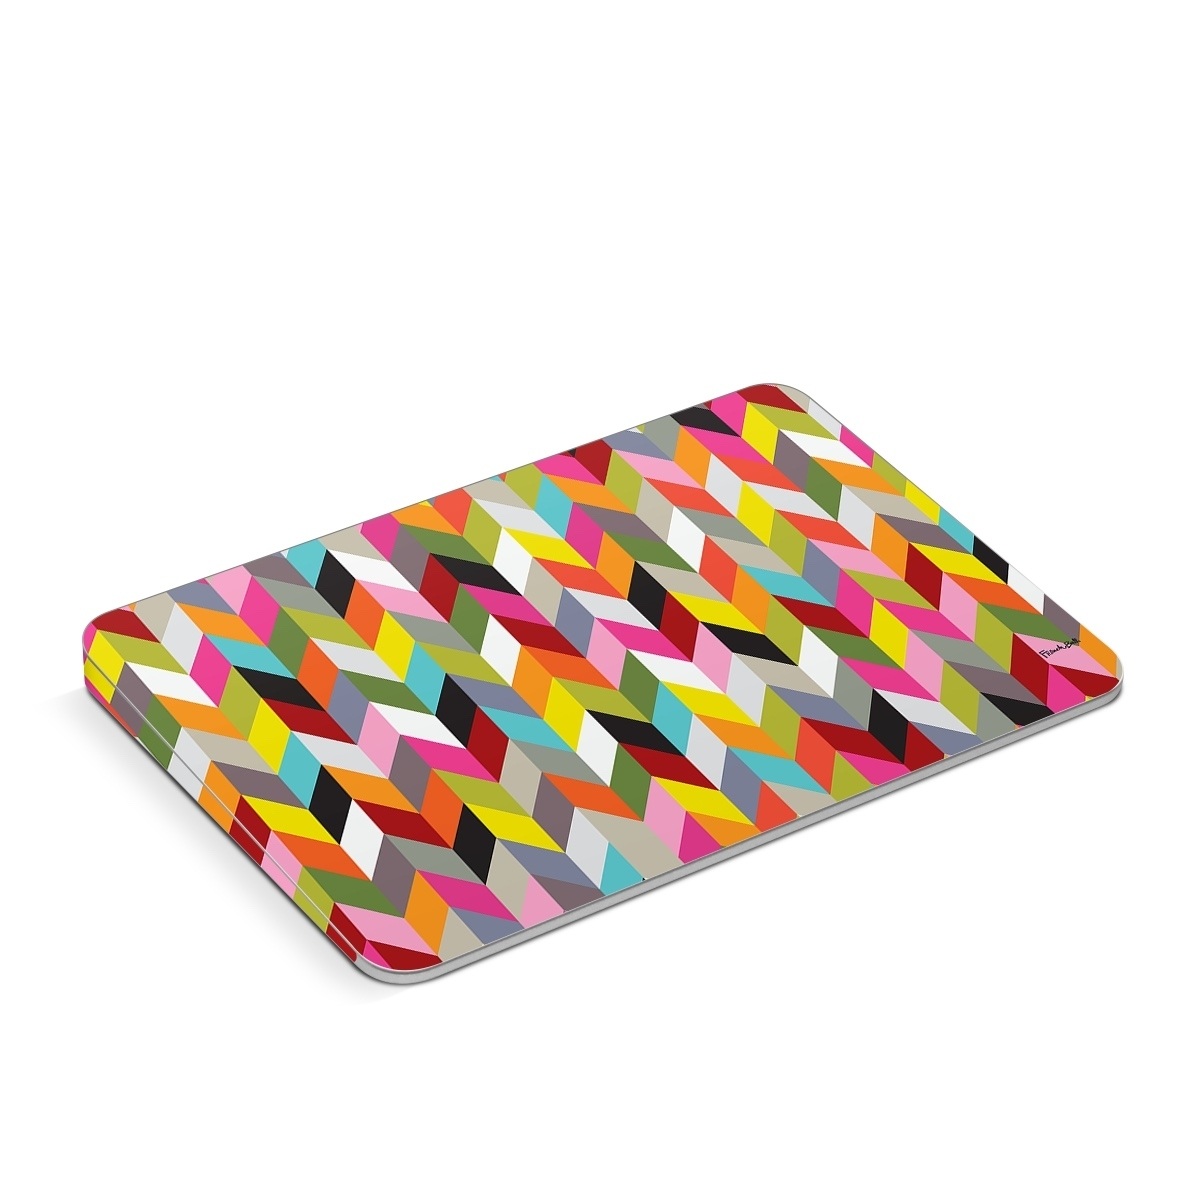 Apple Magic Trackpad Skin design of Pattern, Orange, Line, Design, Graphic design, Tints and shades, Triangle, with red, green, gray, black, blue, purple colors